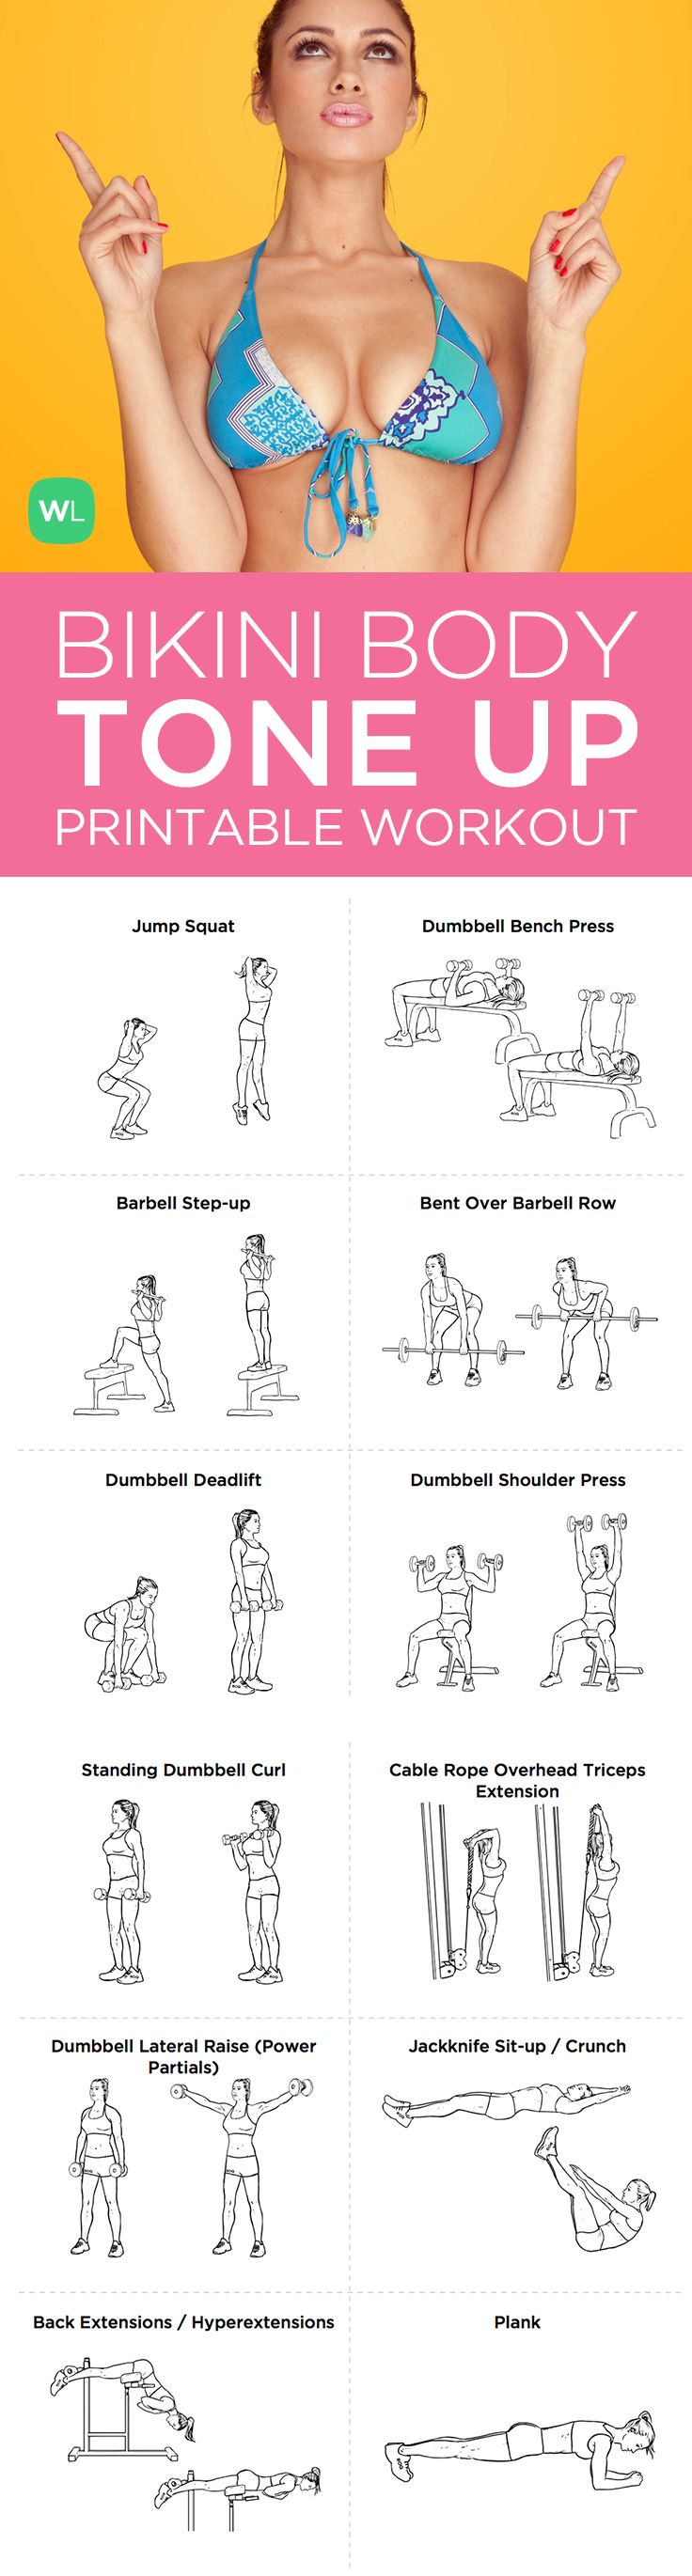 9-best-images-of-printable-workout-plans-printable-workout-weight